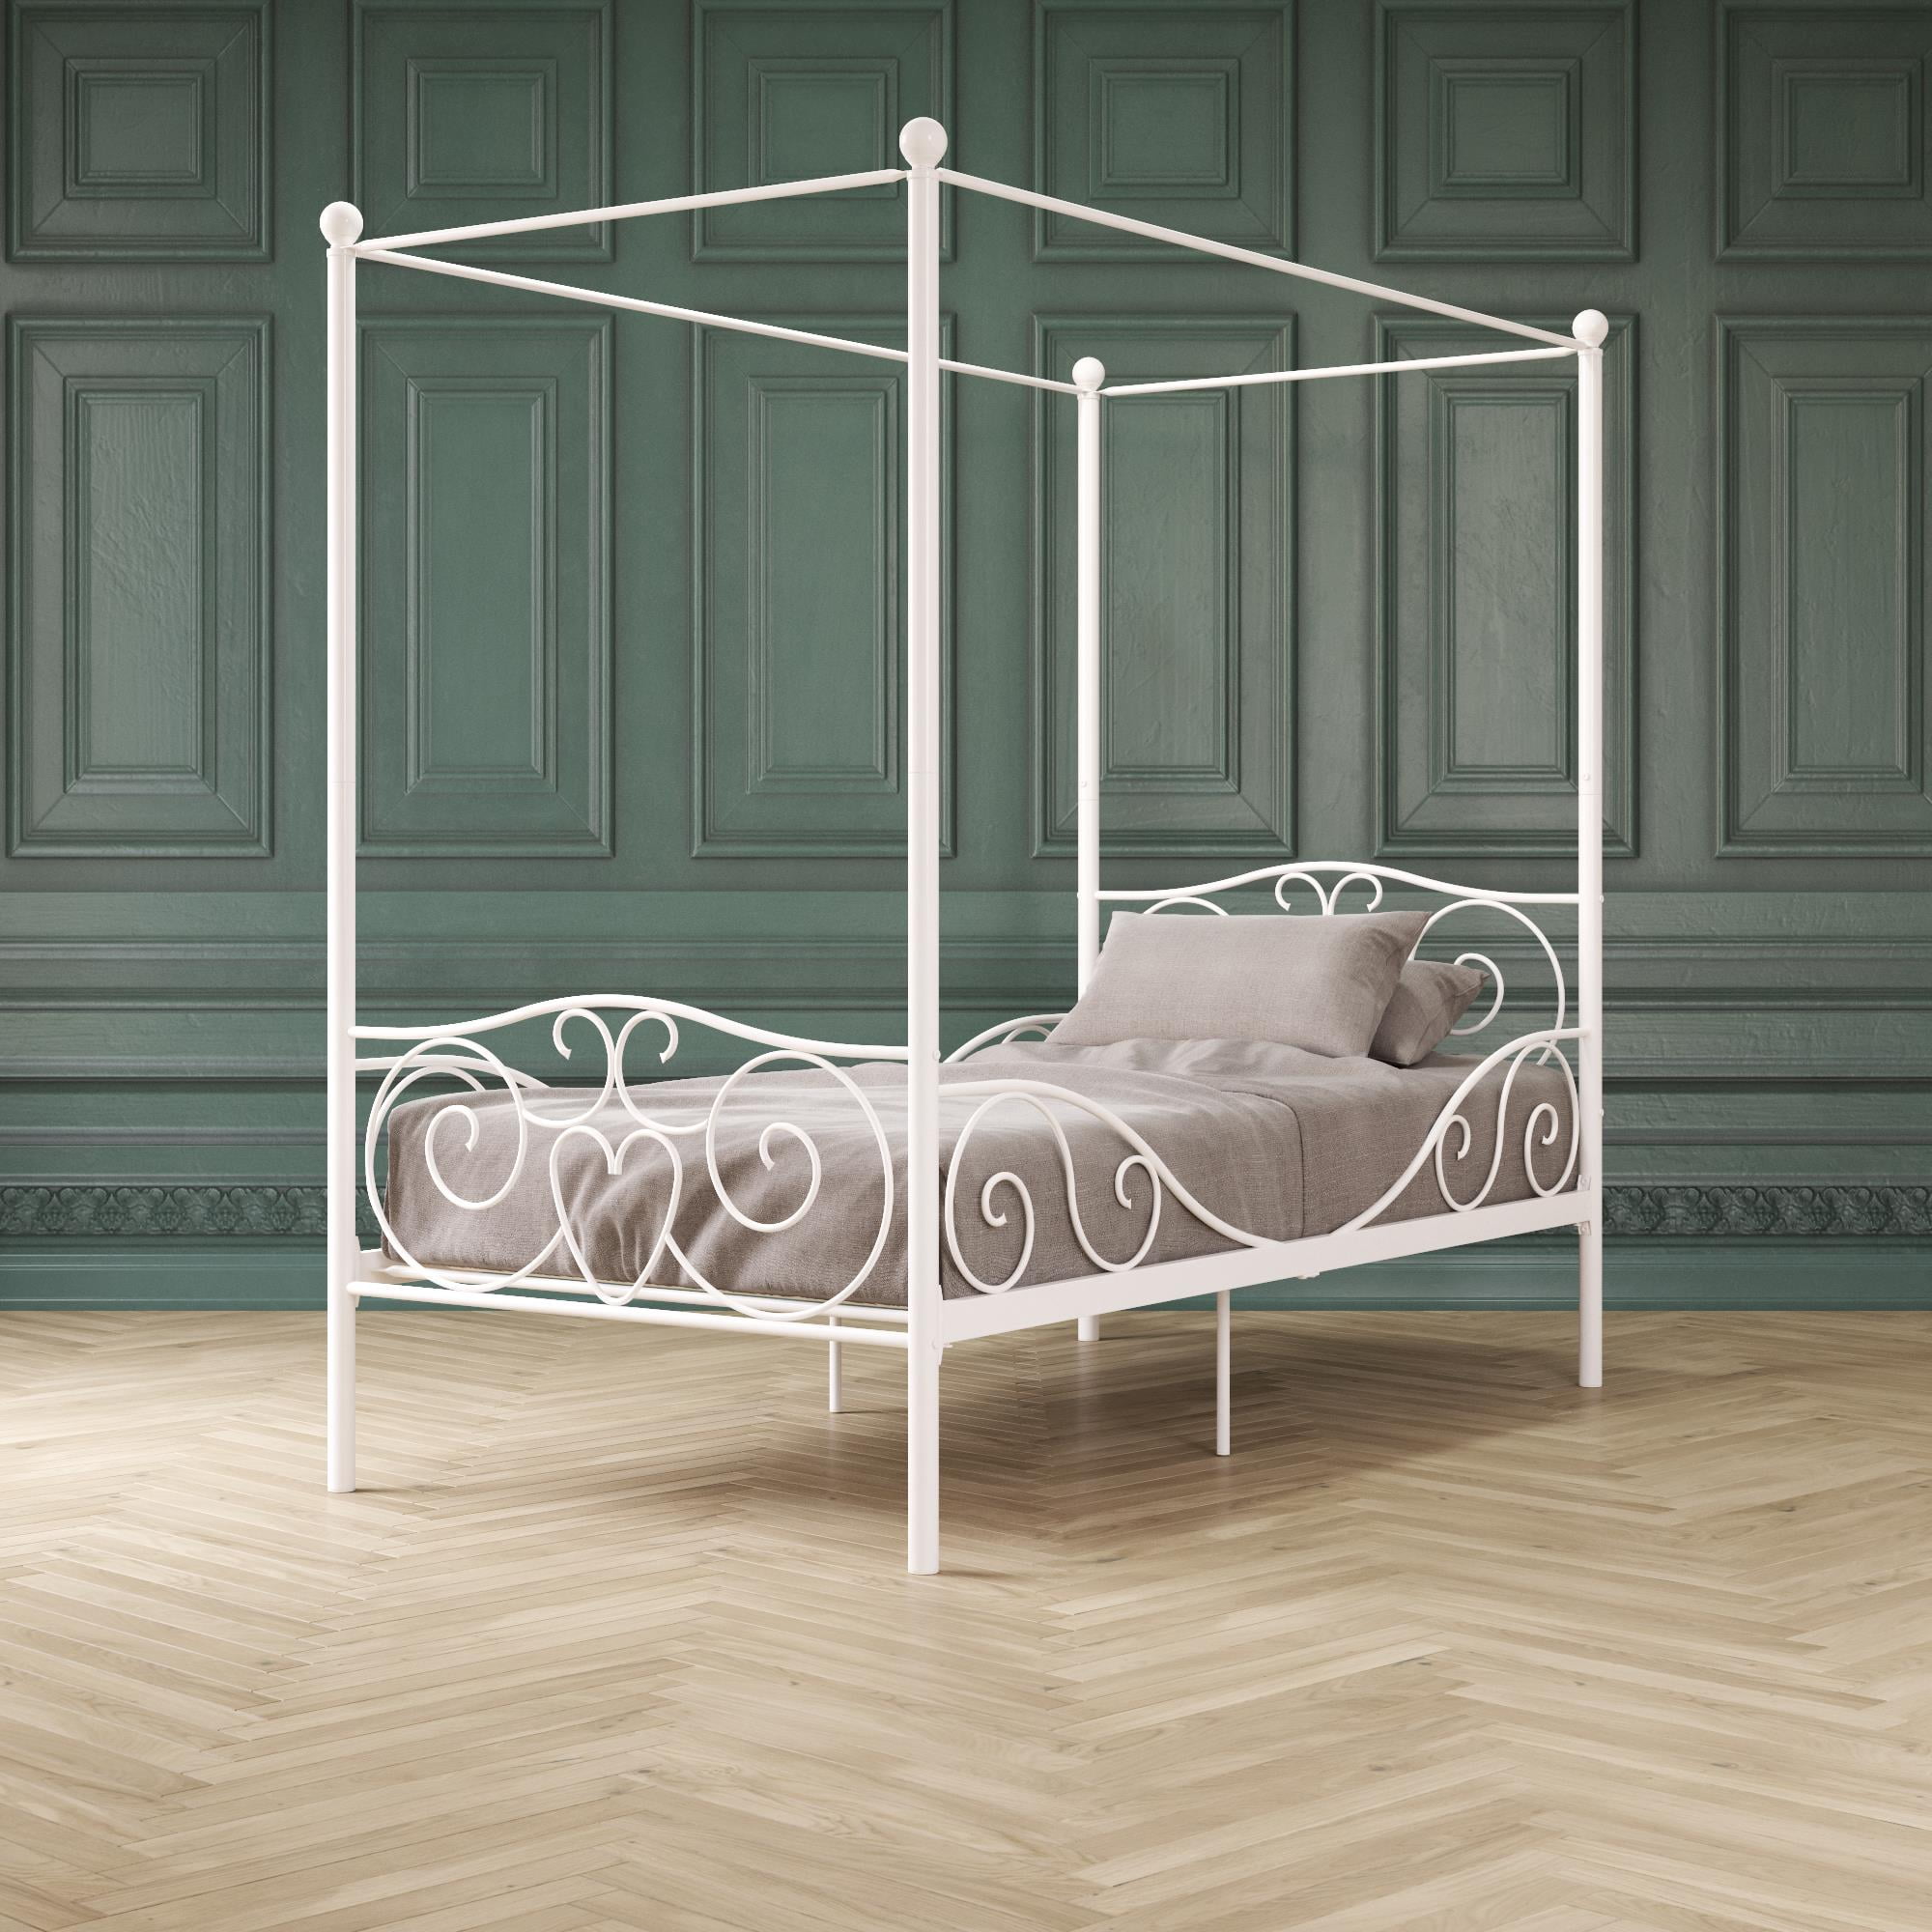 Oak Canopy Metal Bed Twin Size Frame, White Four Poster Twin Bed